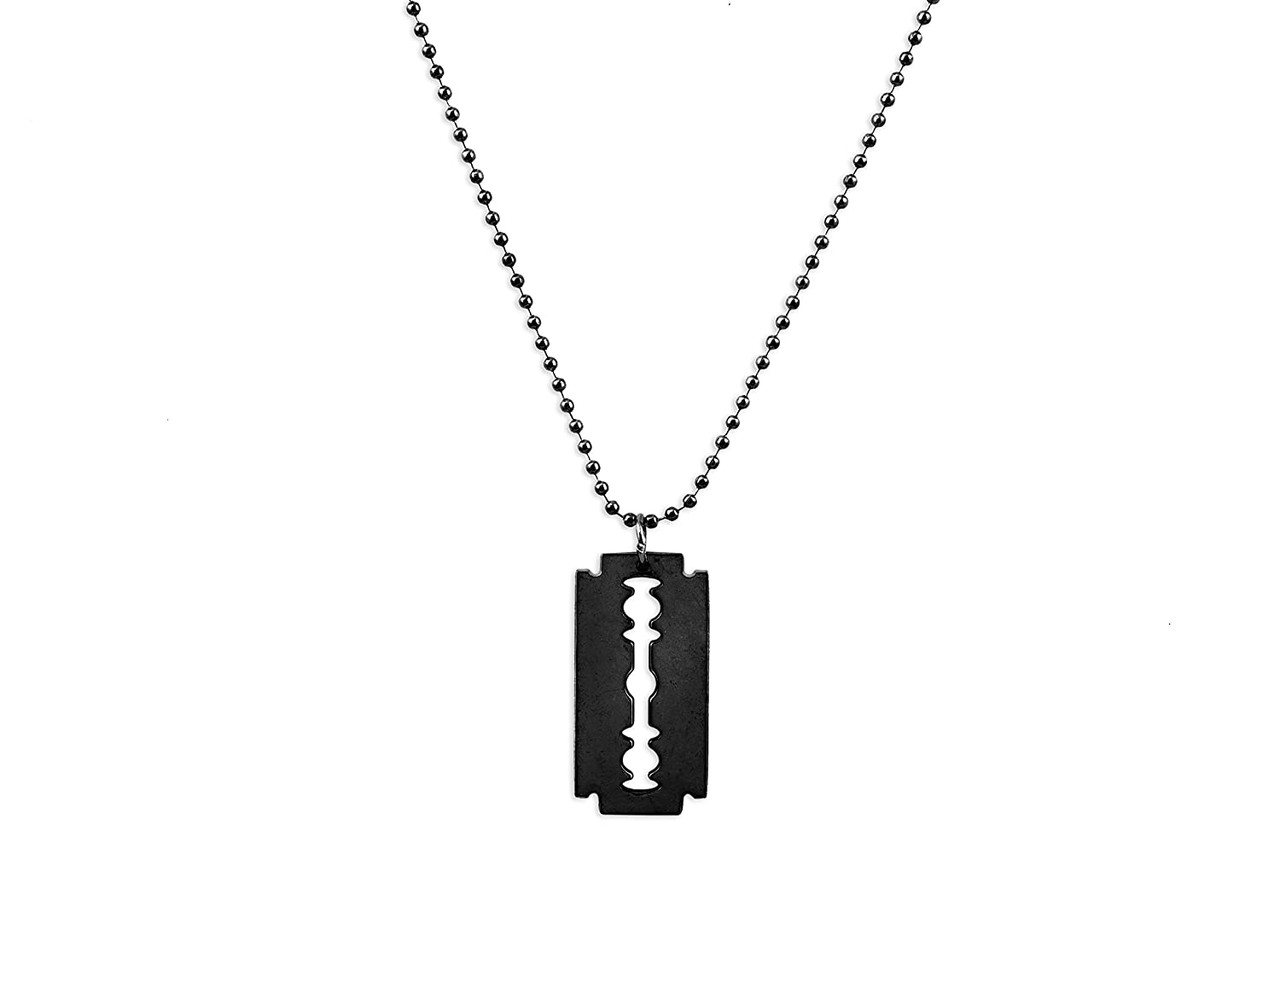 Steel Razor Blade Necklace with Ball Chain